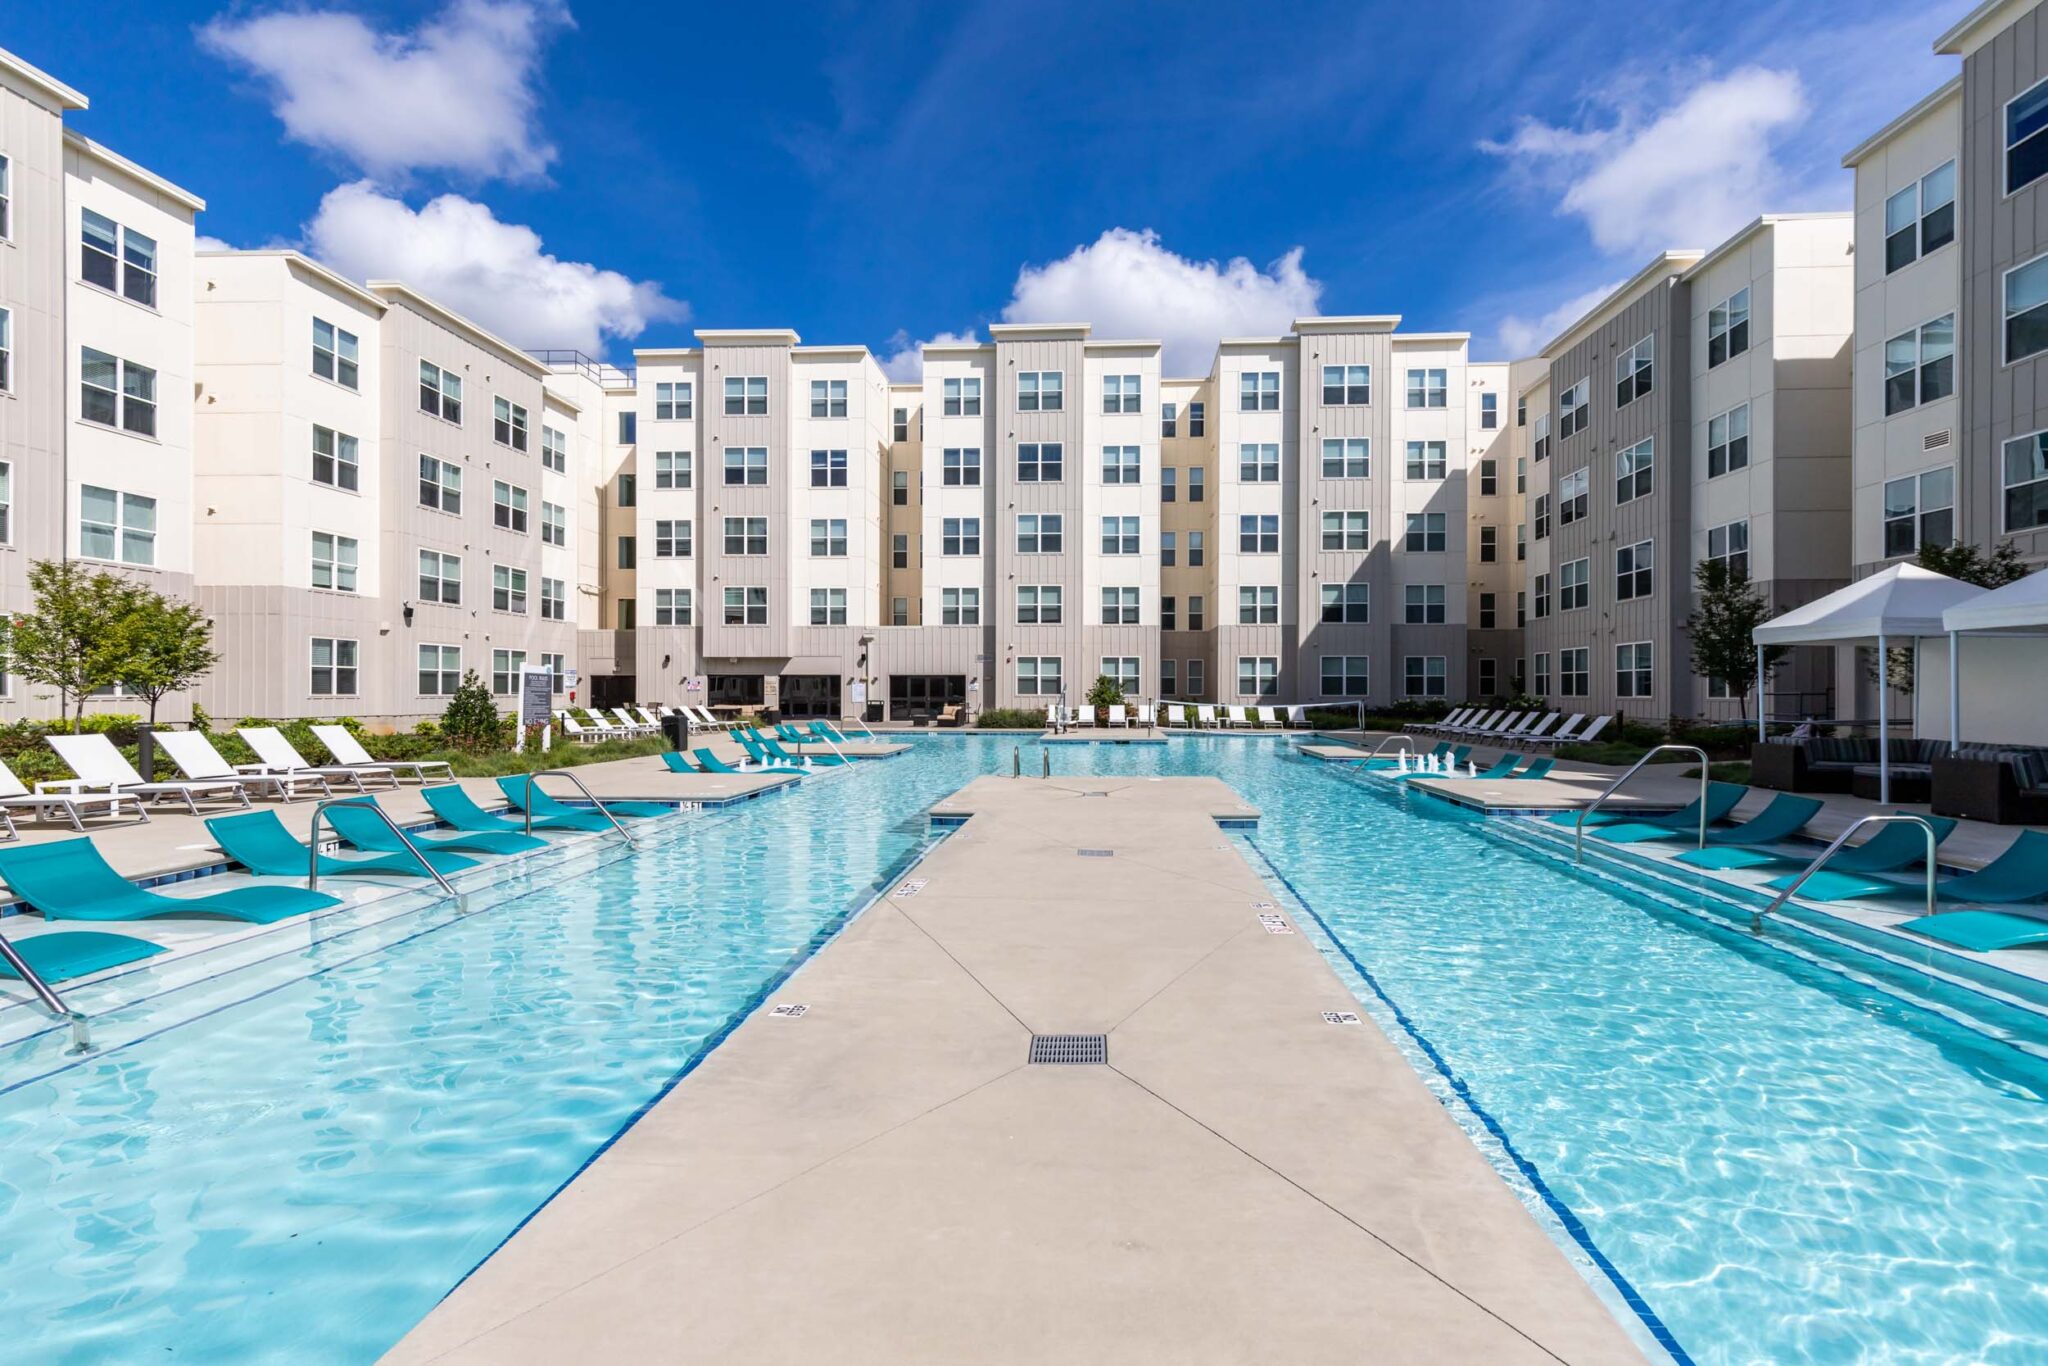 Outdoor Pool and Lounge Chairs Surrounded by Apartment Buildings